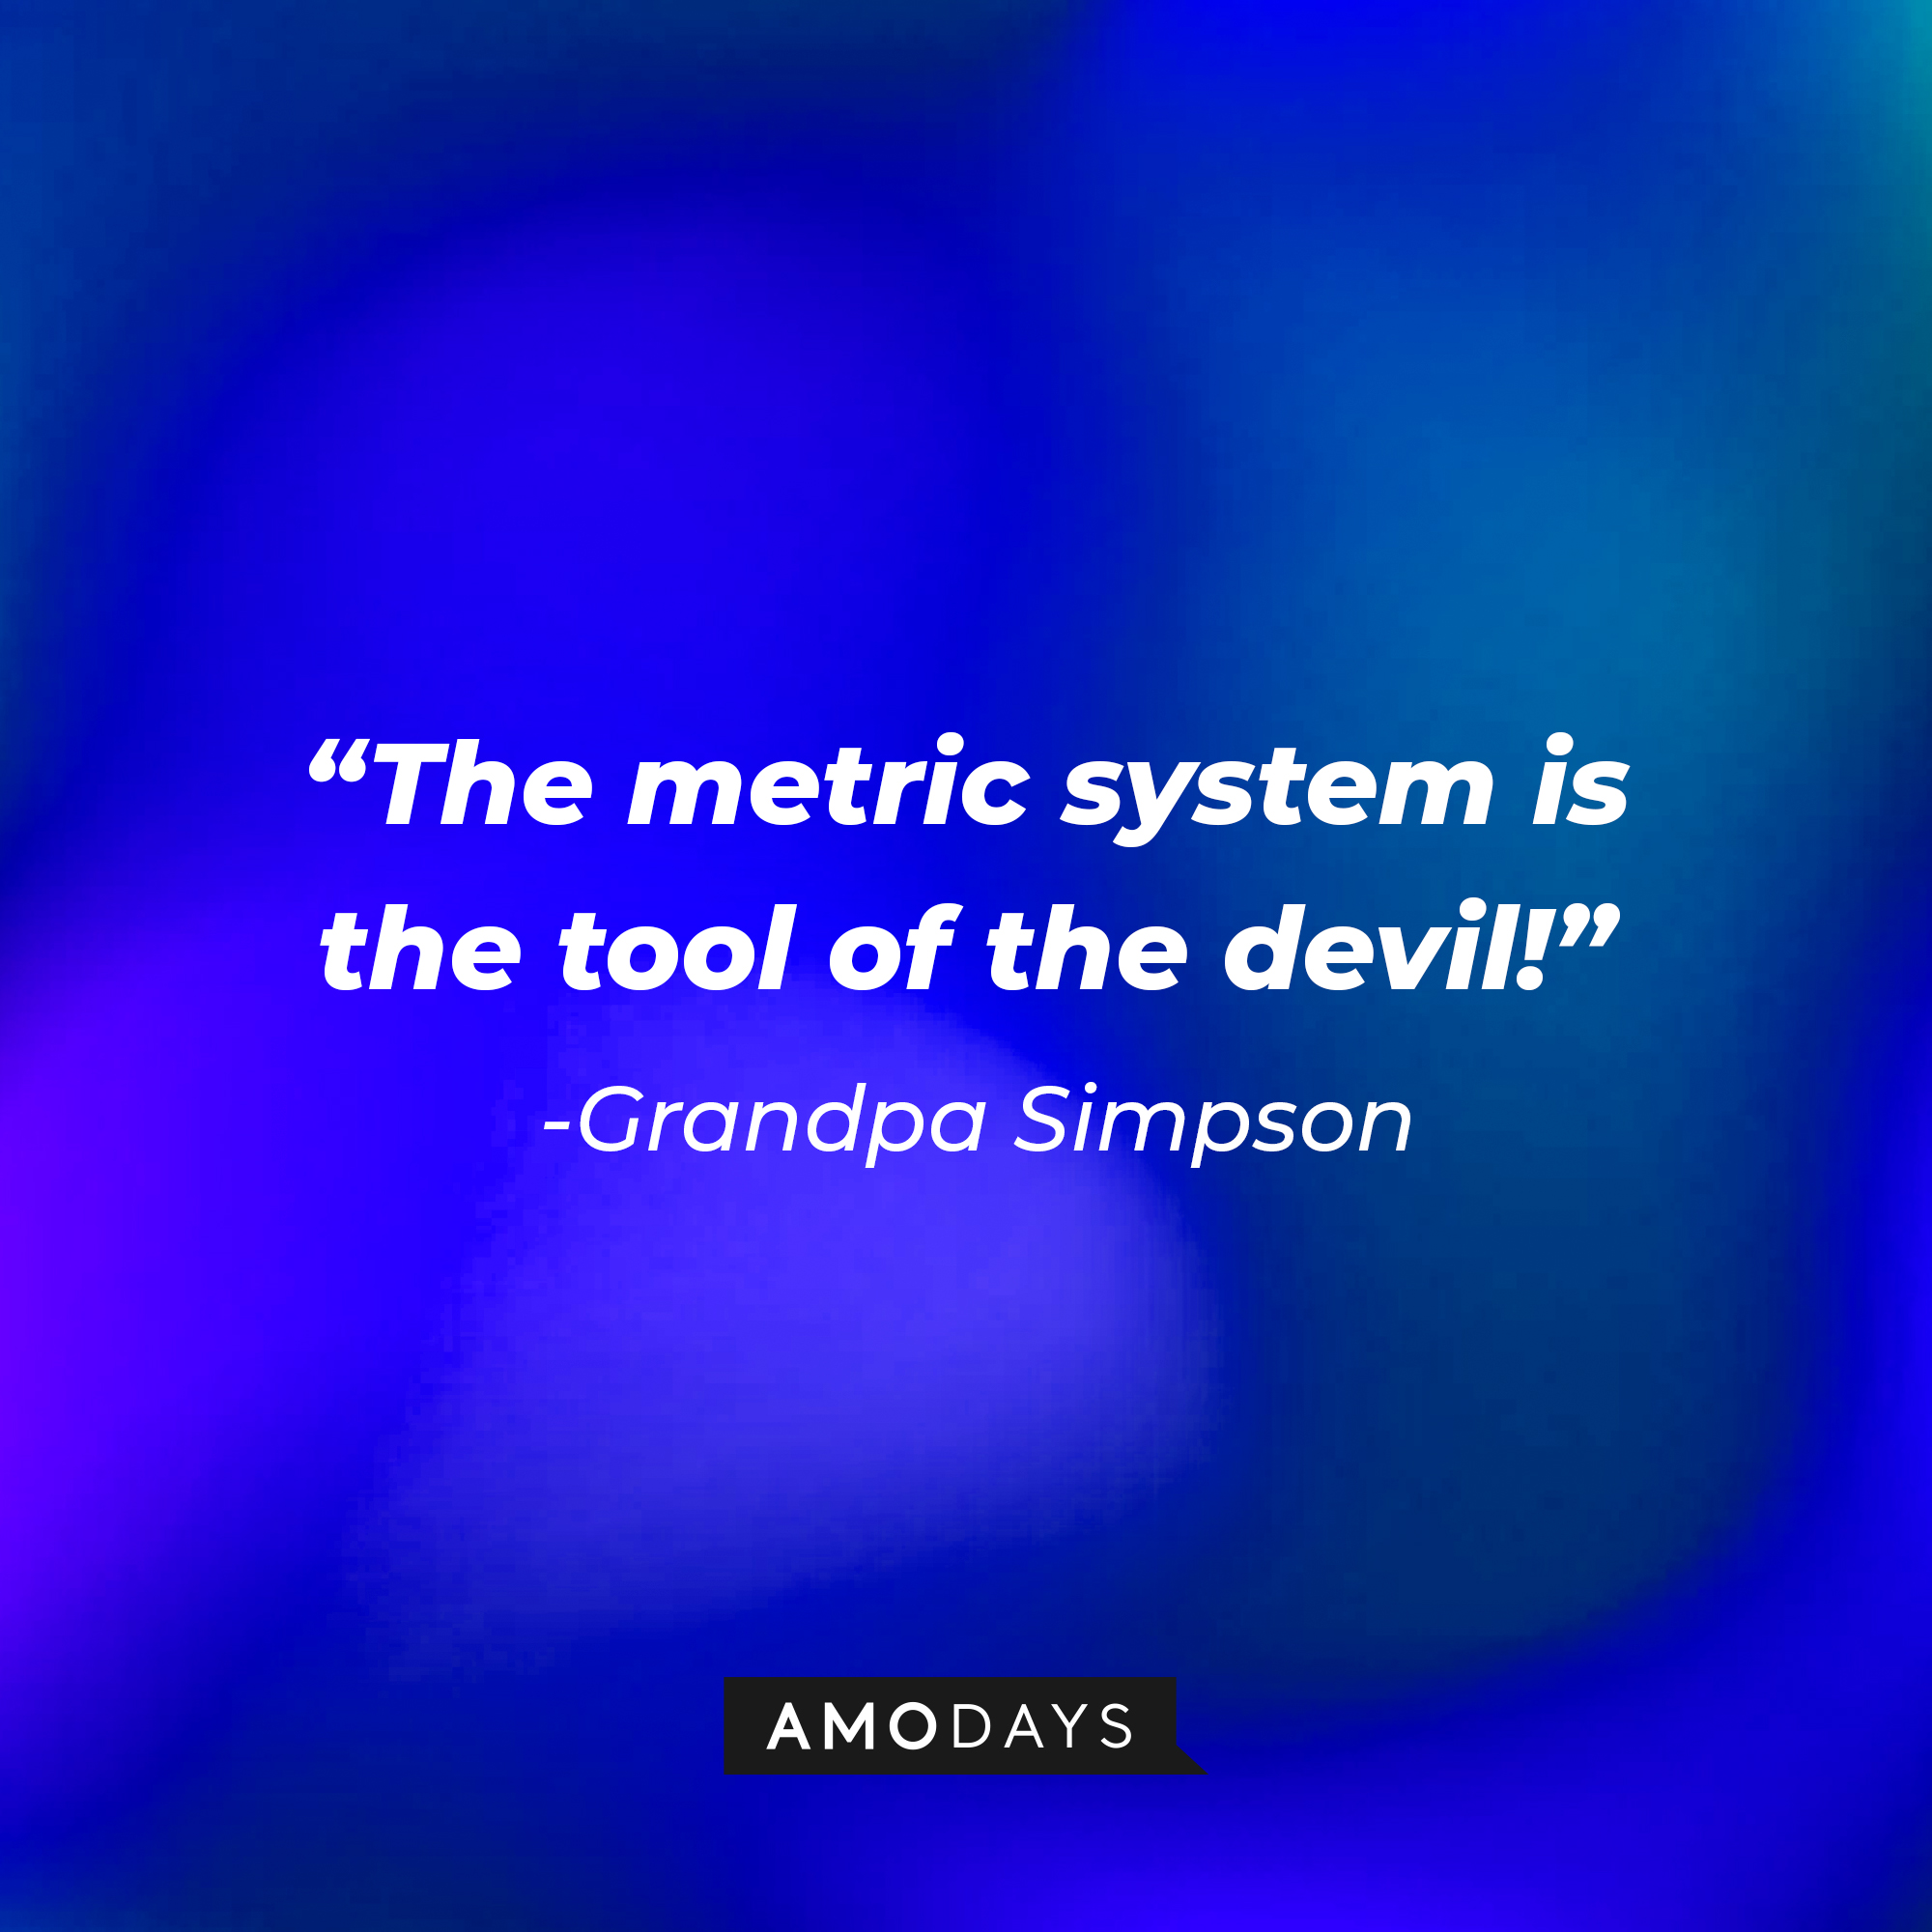 Grandpa Simpson's quote: “The metric system is the tool of the devil!”| Source: AmoDays